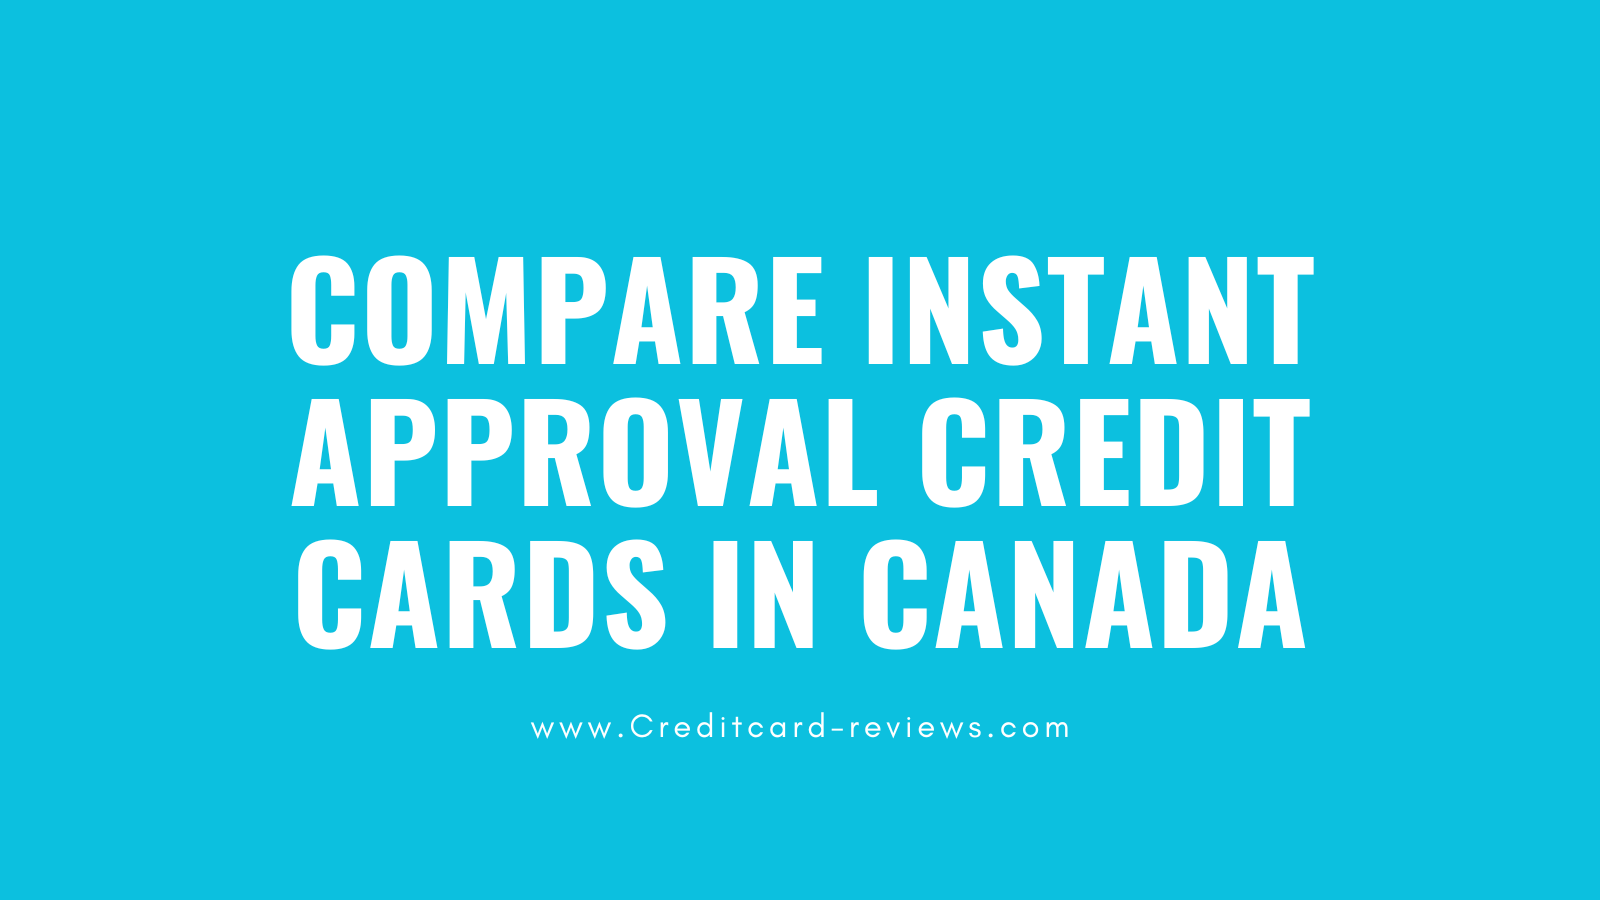 Compare Instant Approval Credit Cards in Canada